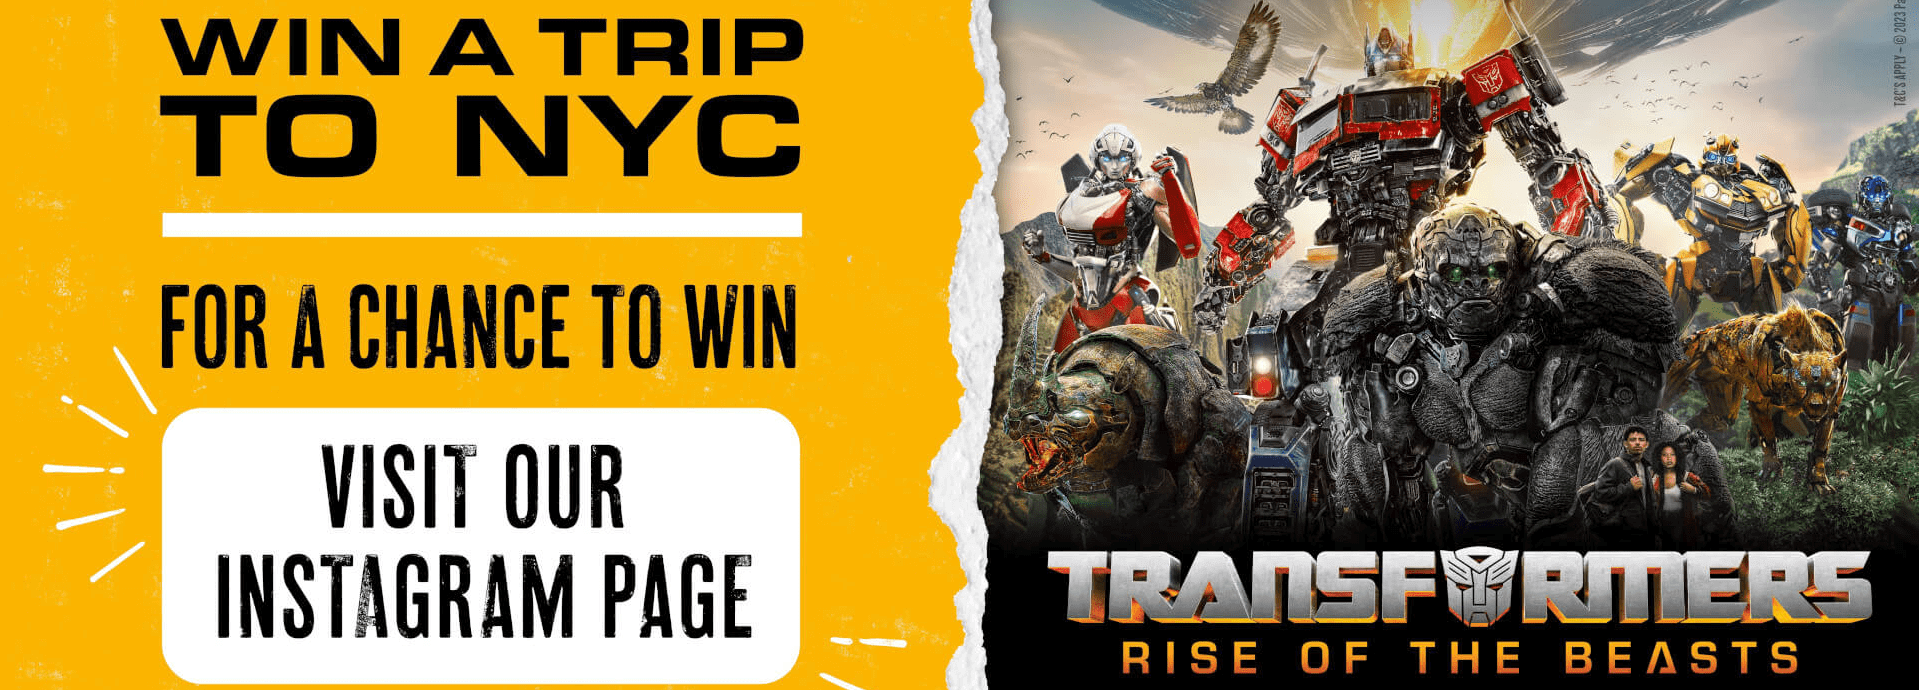 Rollover x Transformers Competition: Win a trip to New York City